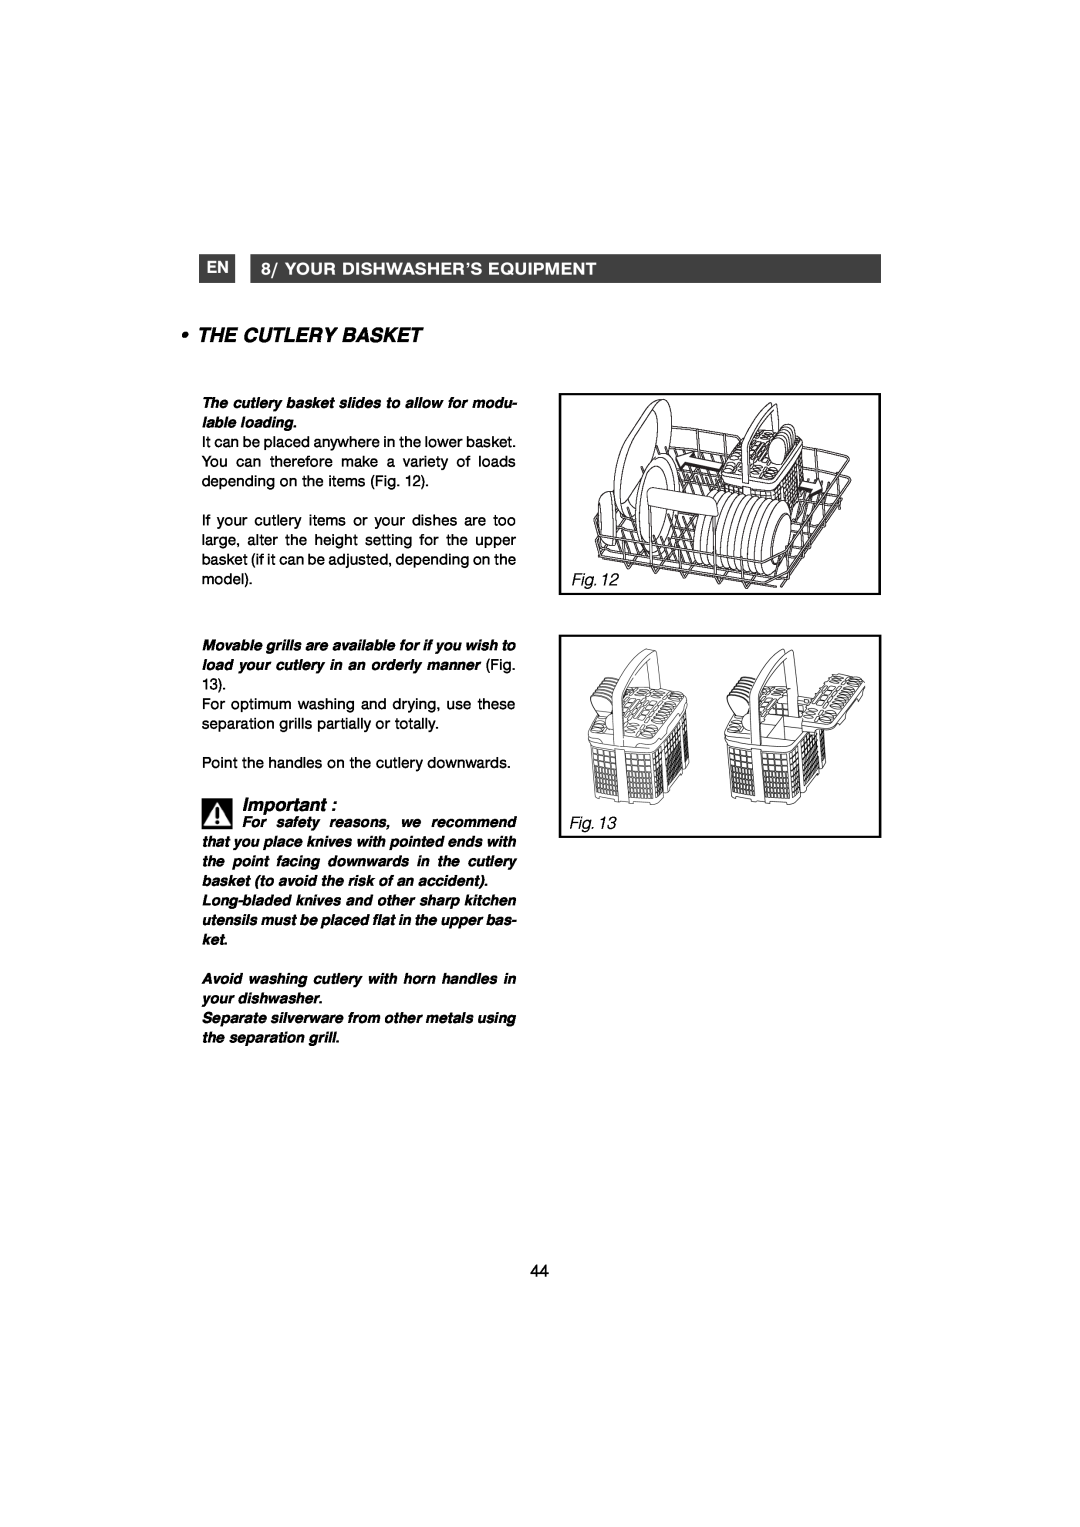 Foster S4000 manual The Cutlery Basket, EN 8/ YOUR DISHWASHER’S EQUIPMENT 